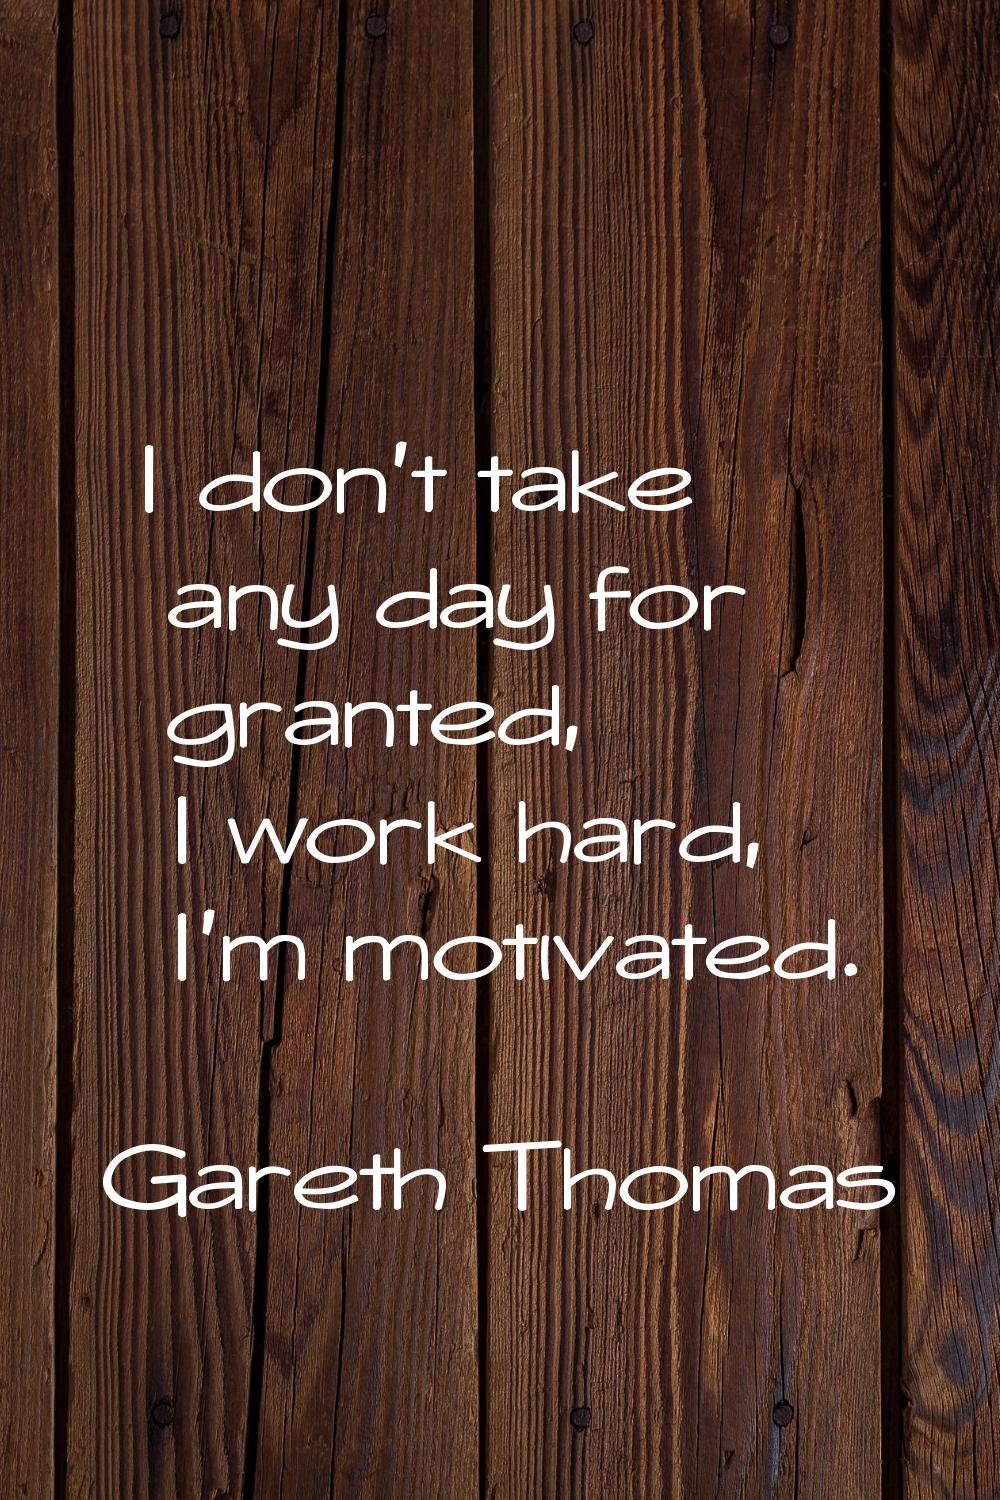 I don't take any day for granted, I work hard, I'm motivated.